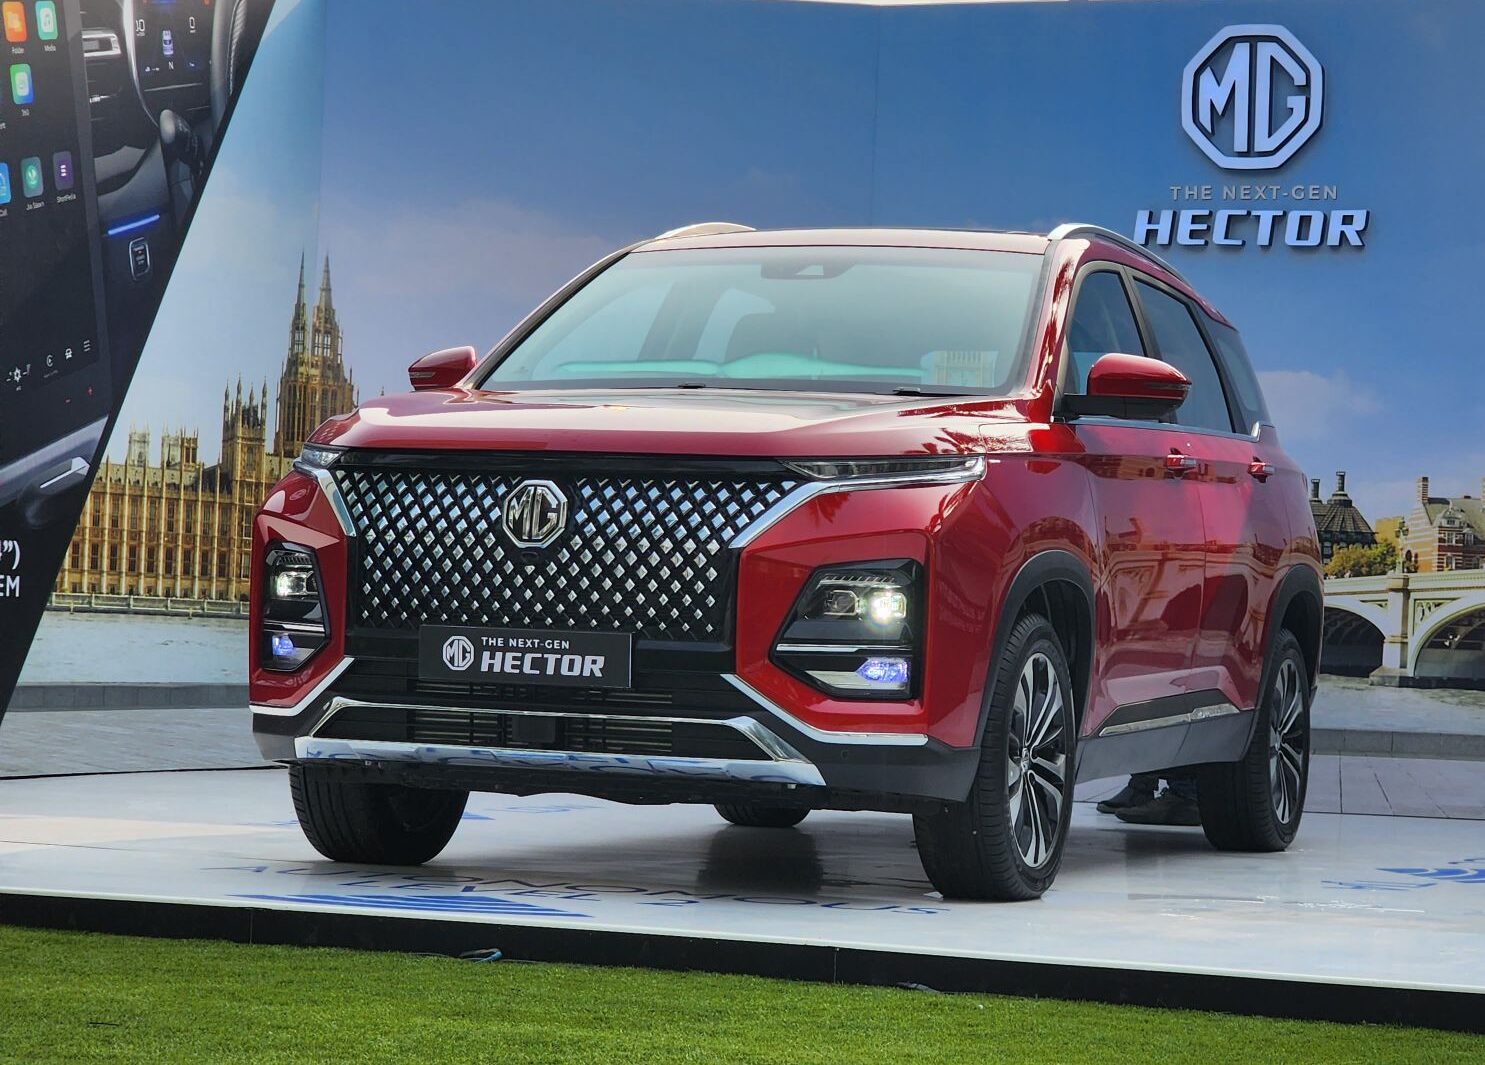 MG Hector and Hector Plus Is Now More Affordable